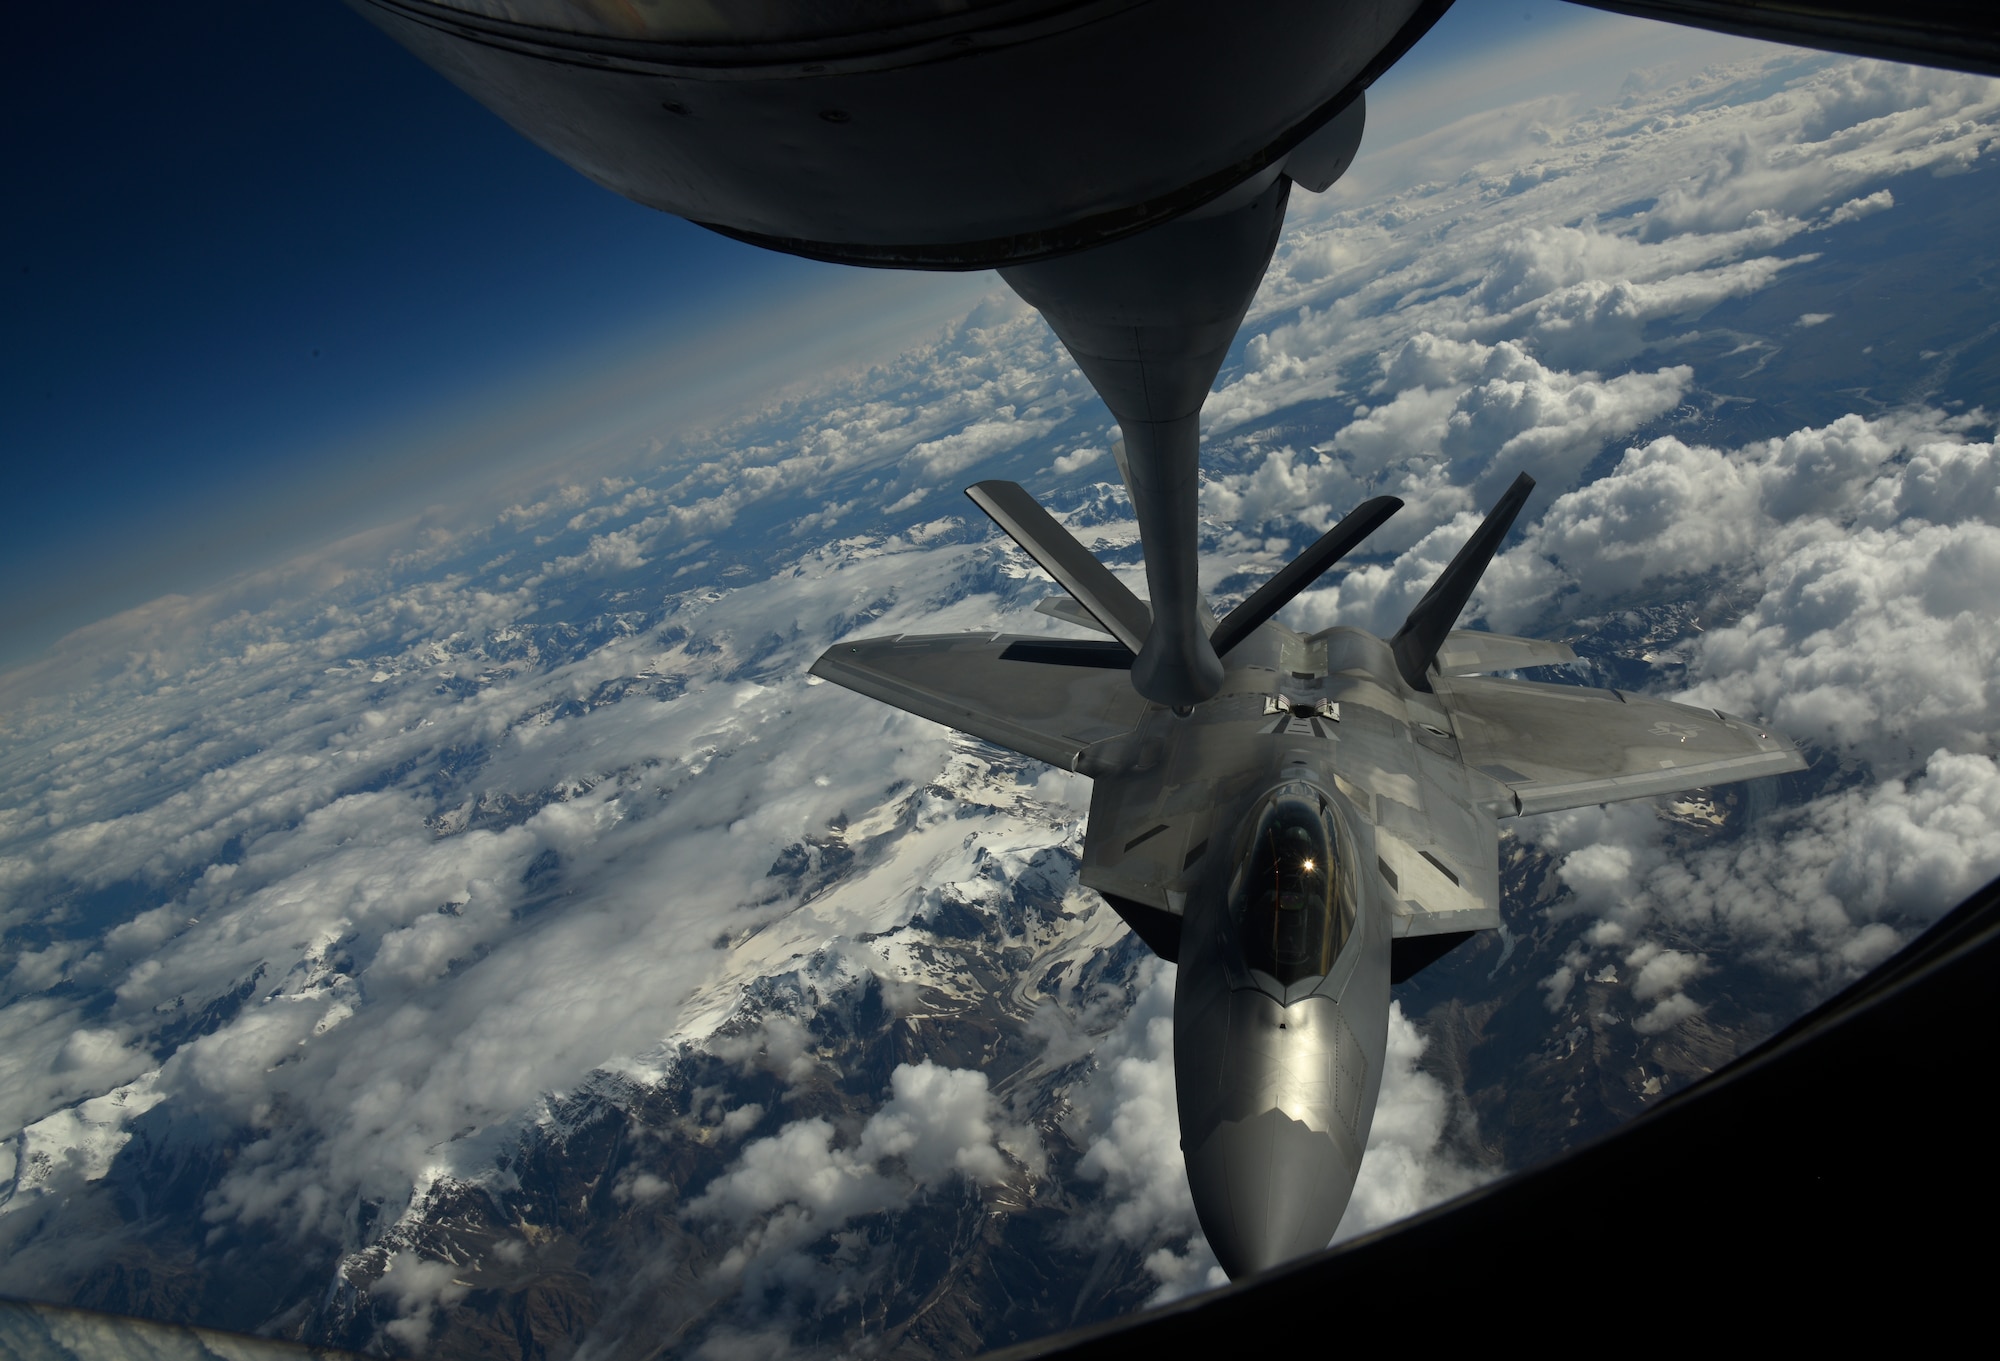 A U.S. Air Force F-22 Raptor from the 354th Fighter Wing prepares to be air refueled by a KC-135 Stratotanker from the 92nd Air Refueling Wing during field training exercise Red Flag Alaska 20-3, Aug. 5, 2020. The Indo-Pacific is a top priority for the United States, and the DoD through exercises like RFA 20-3, is committed to ensuring U.S. forces are capable and ready to face the evolving challenges in the region. (U.S. Air Force photo by Staff Sgt. Jesenia Landaverde)